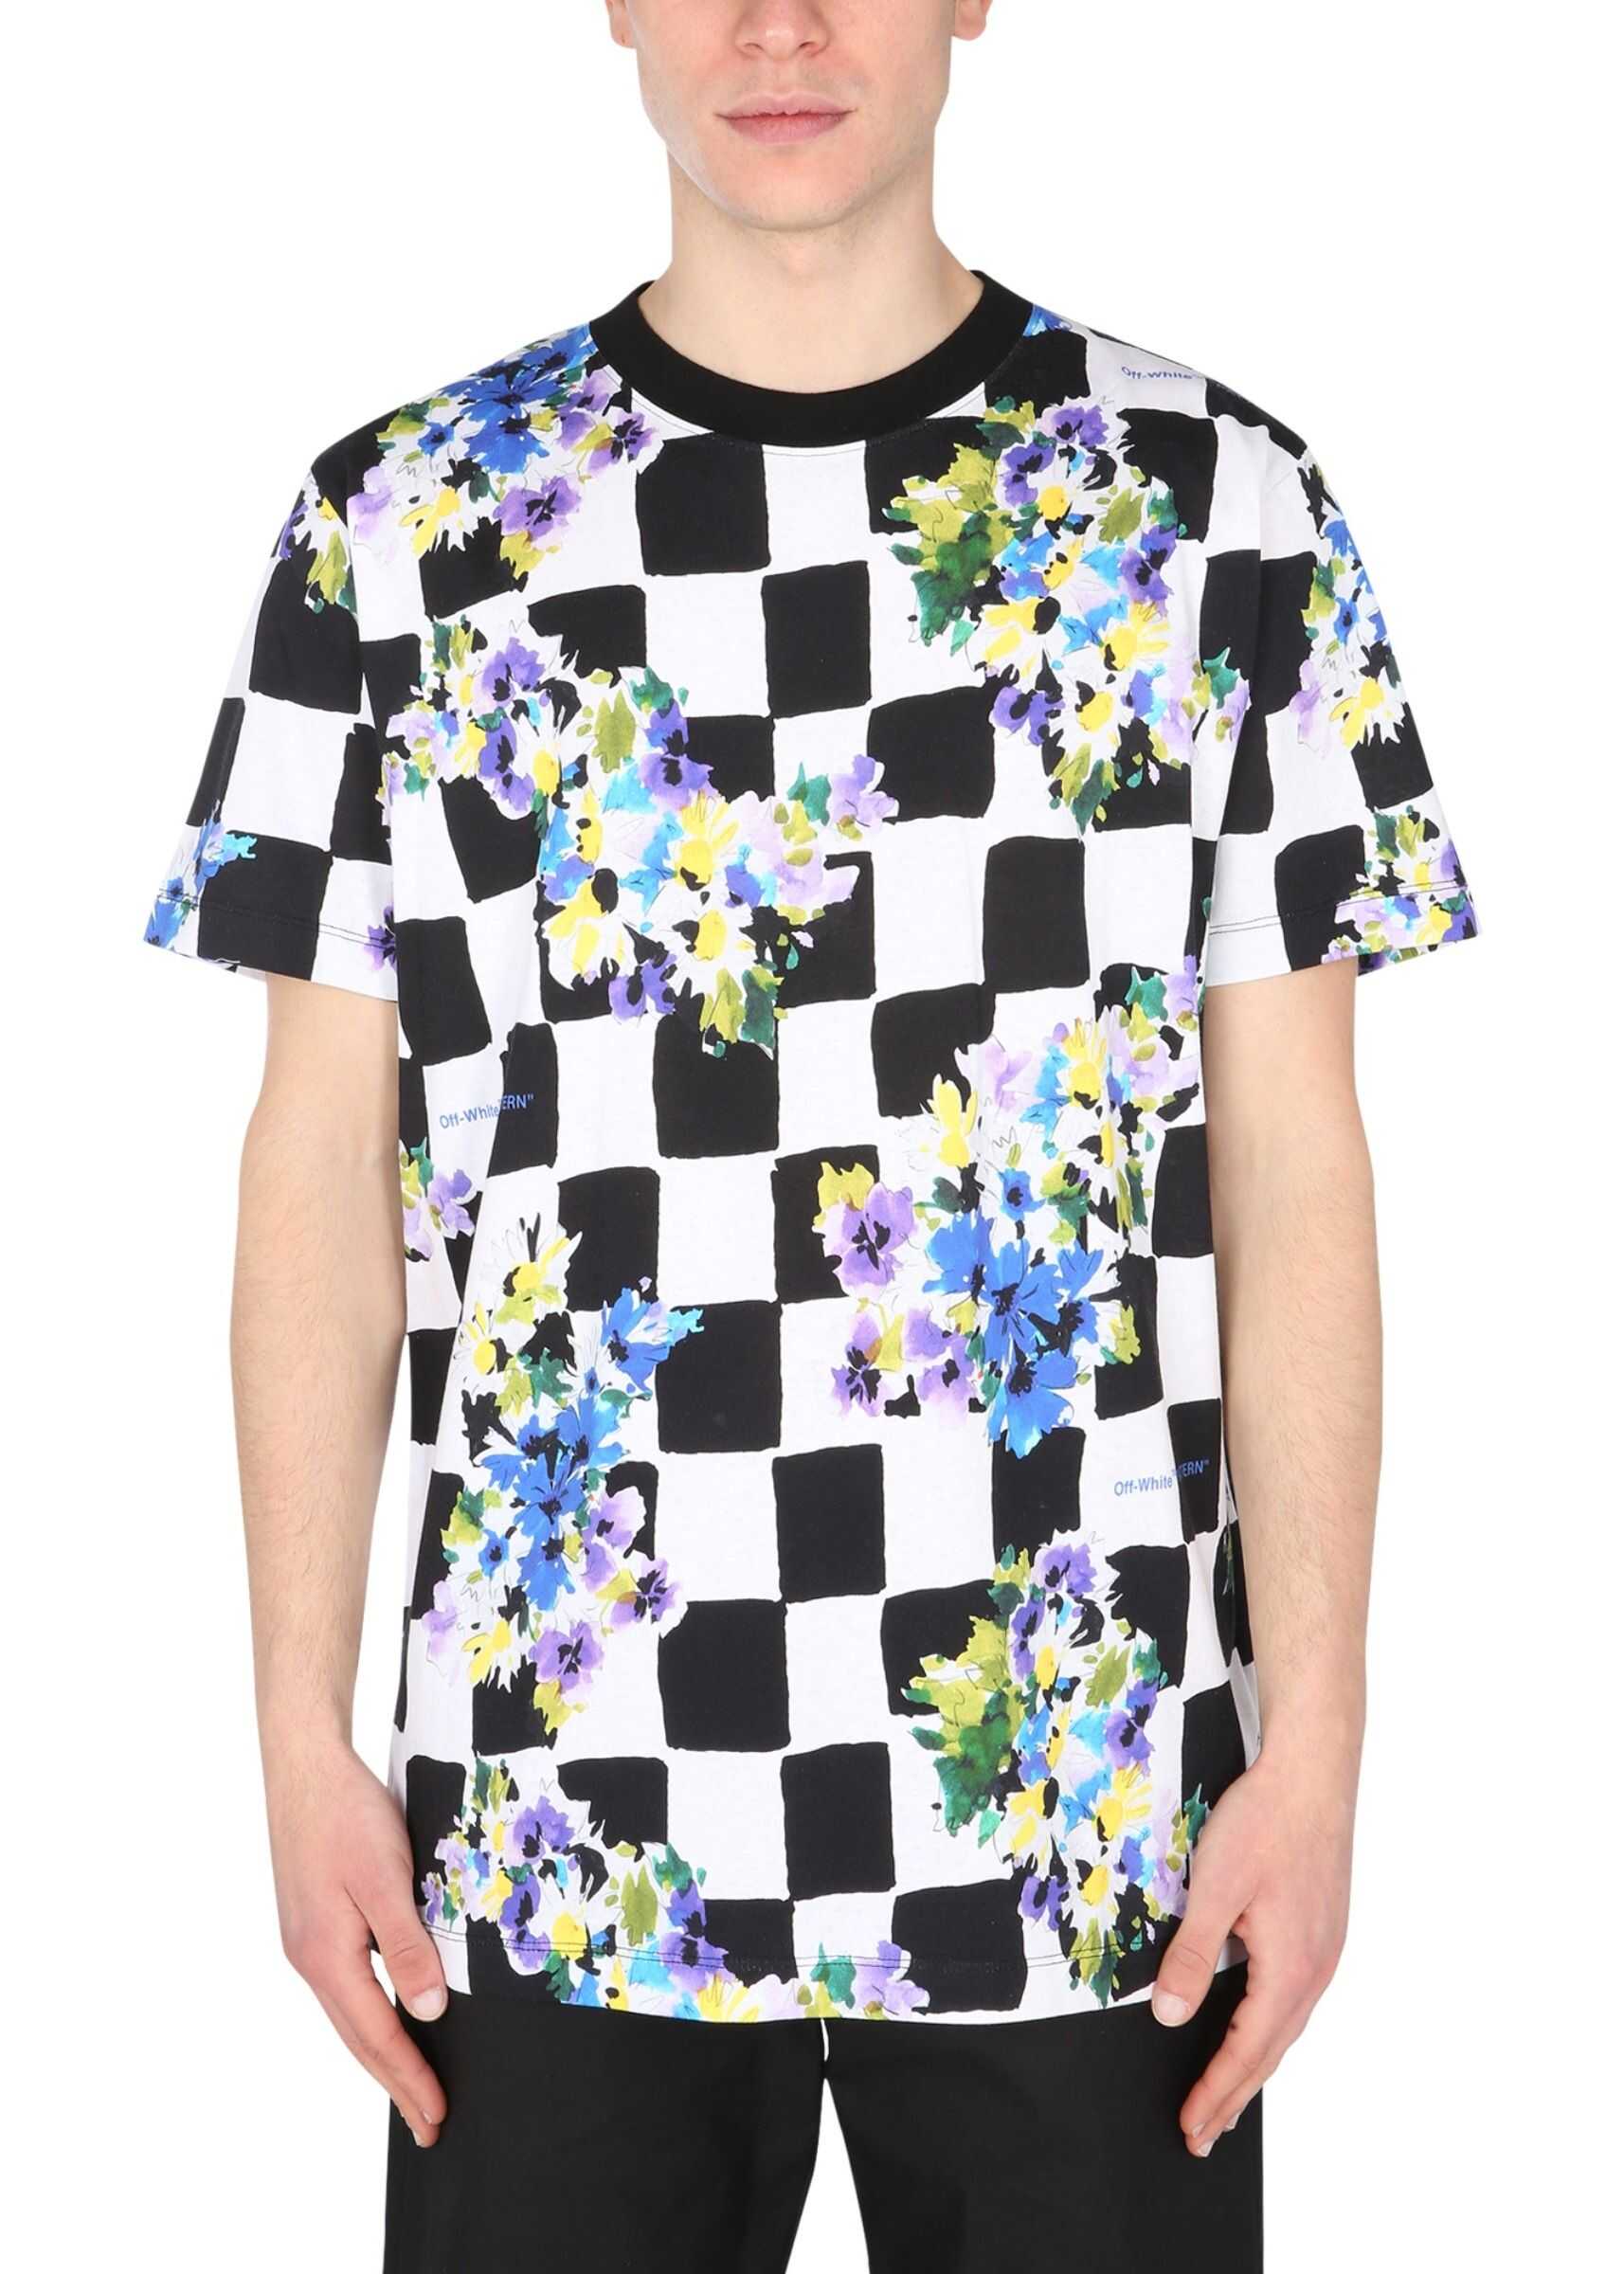 Off-White "Check Flowers" Scoop Neck T-Shirt OMAA027_S21JER0268400 MULTICOLOUR